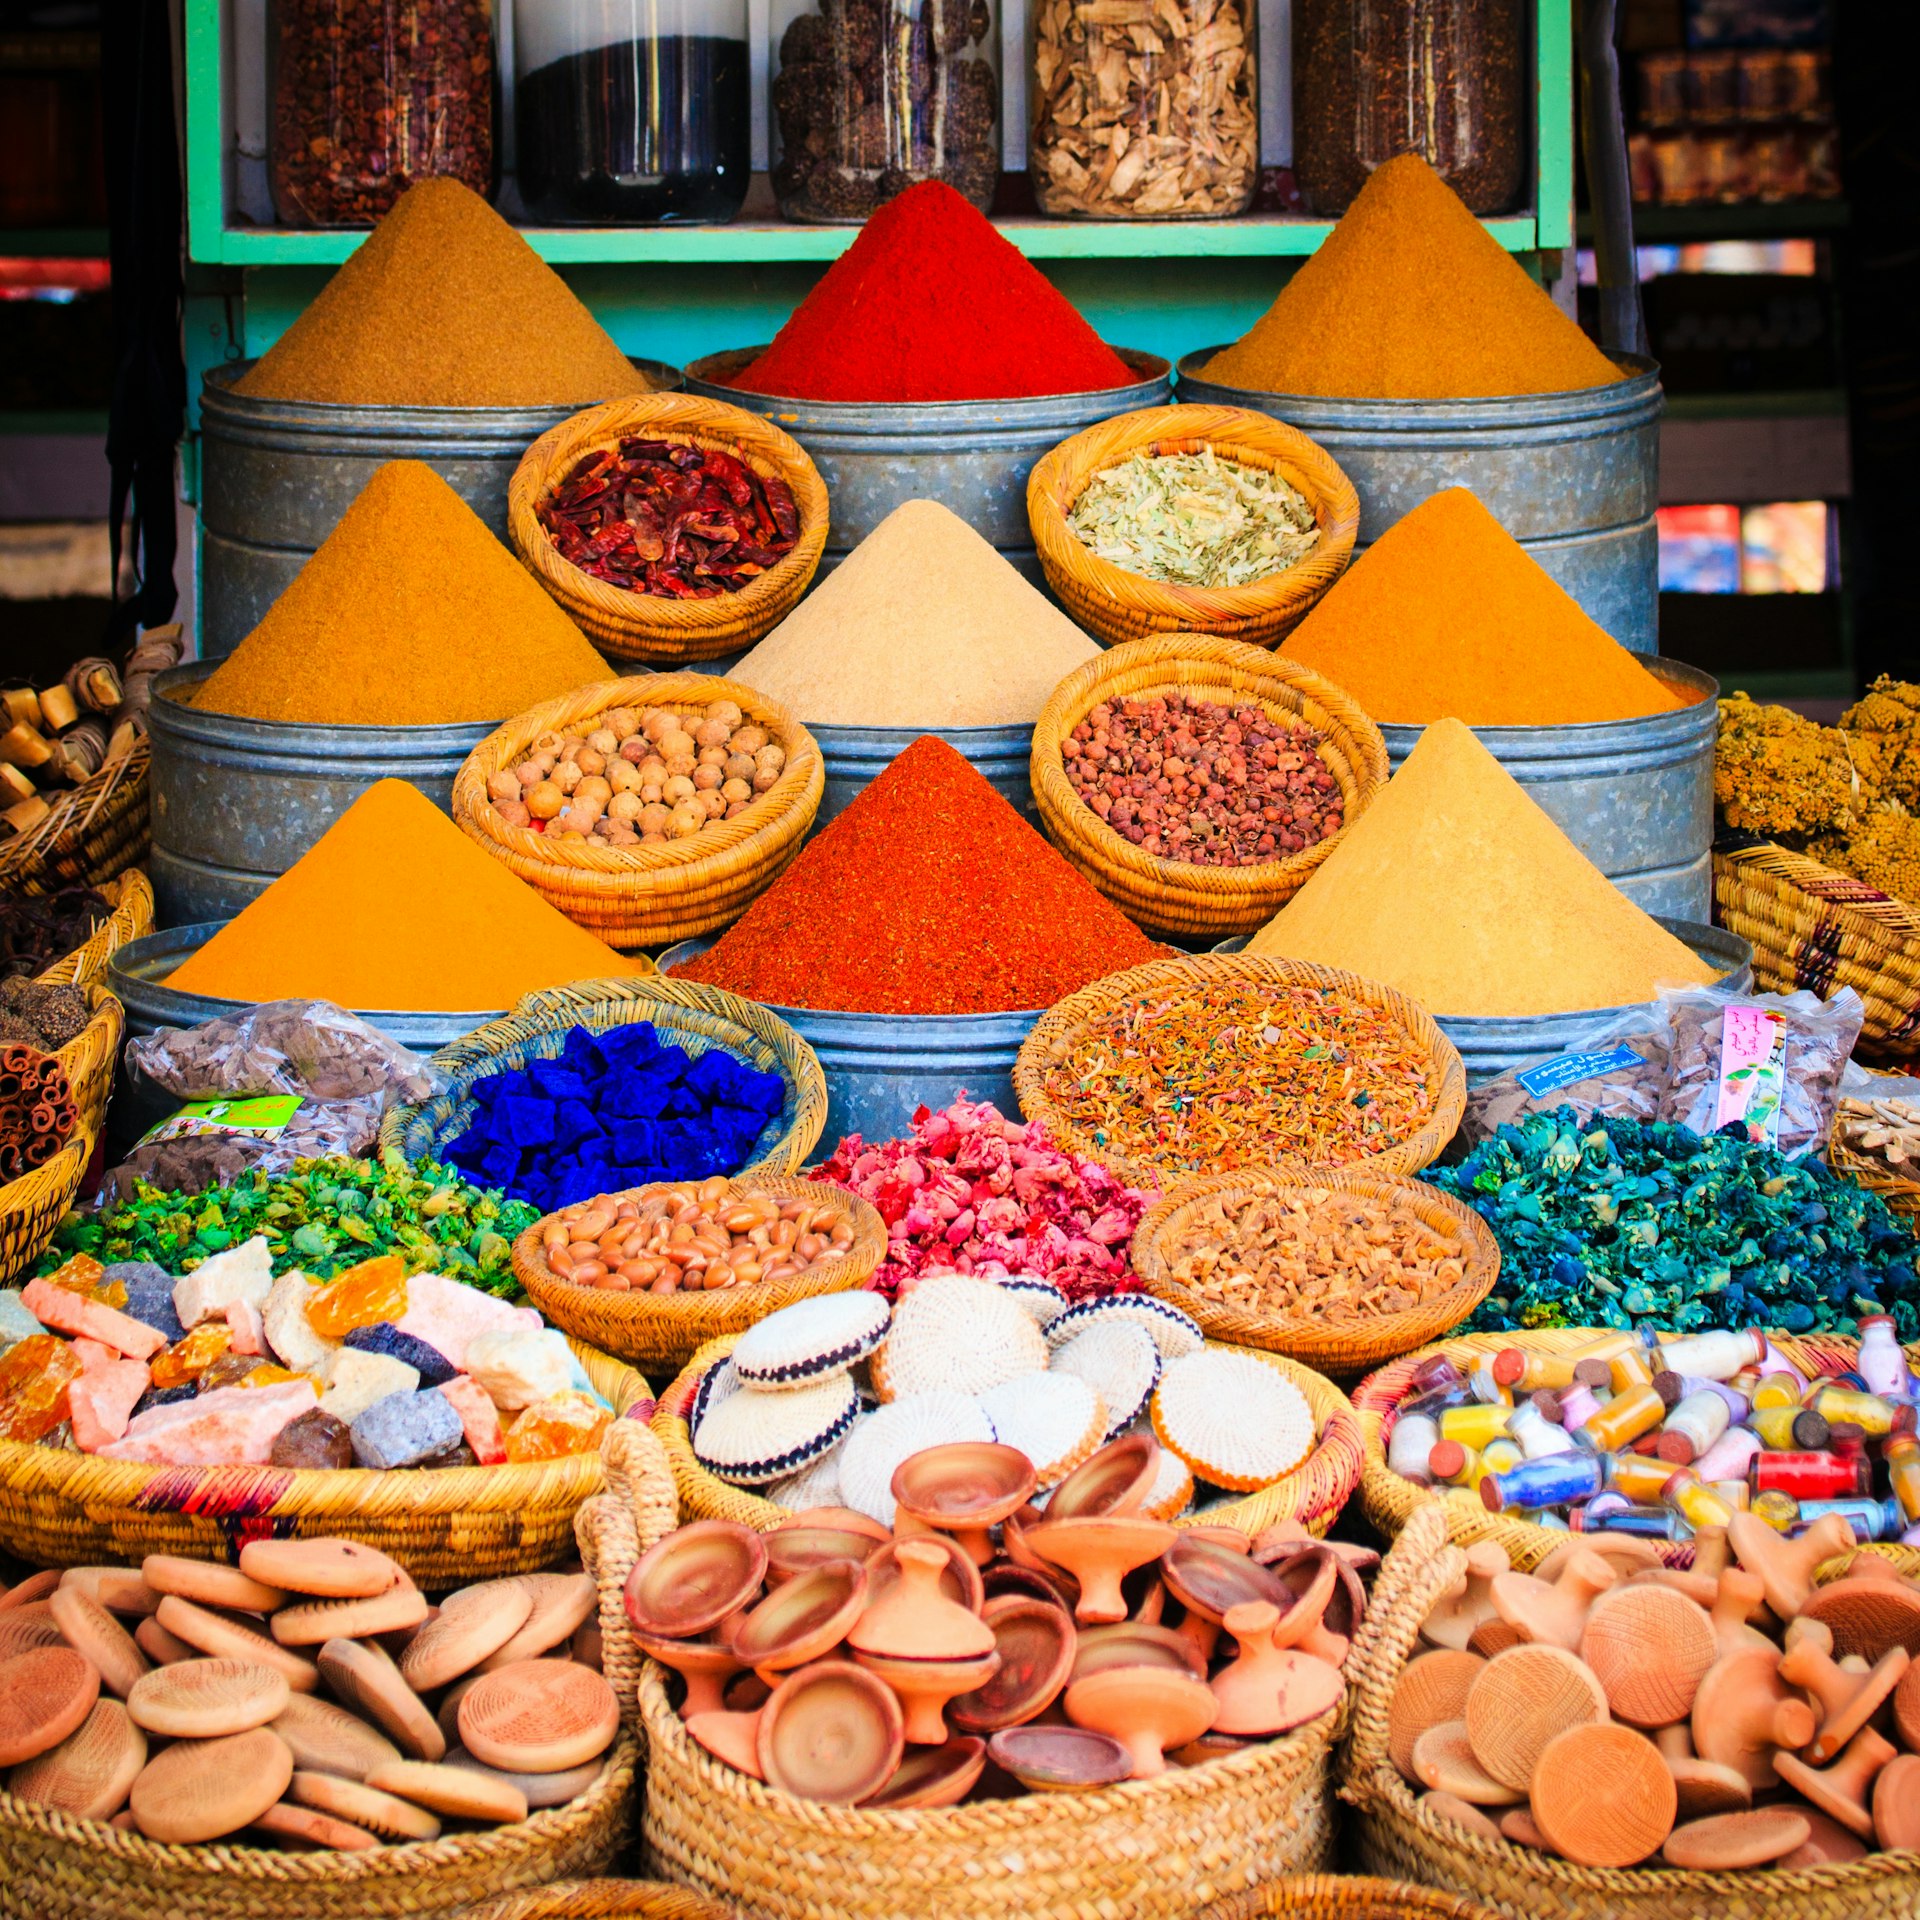 Colorful spices and herbs on display at a moroccan market in Marrakesh